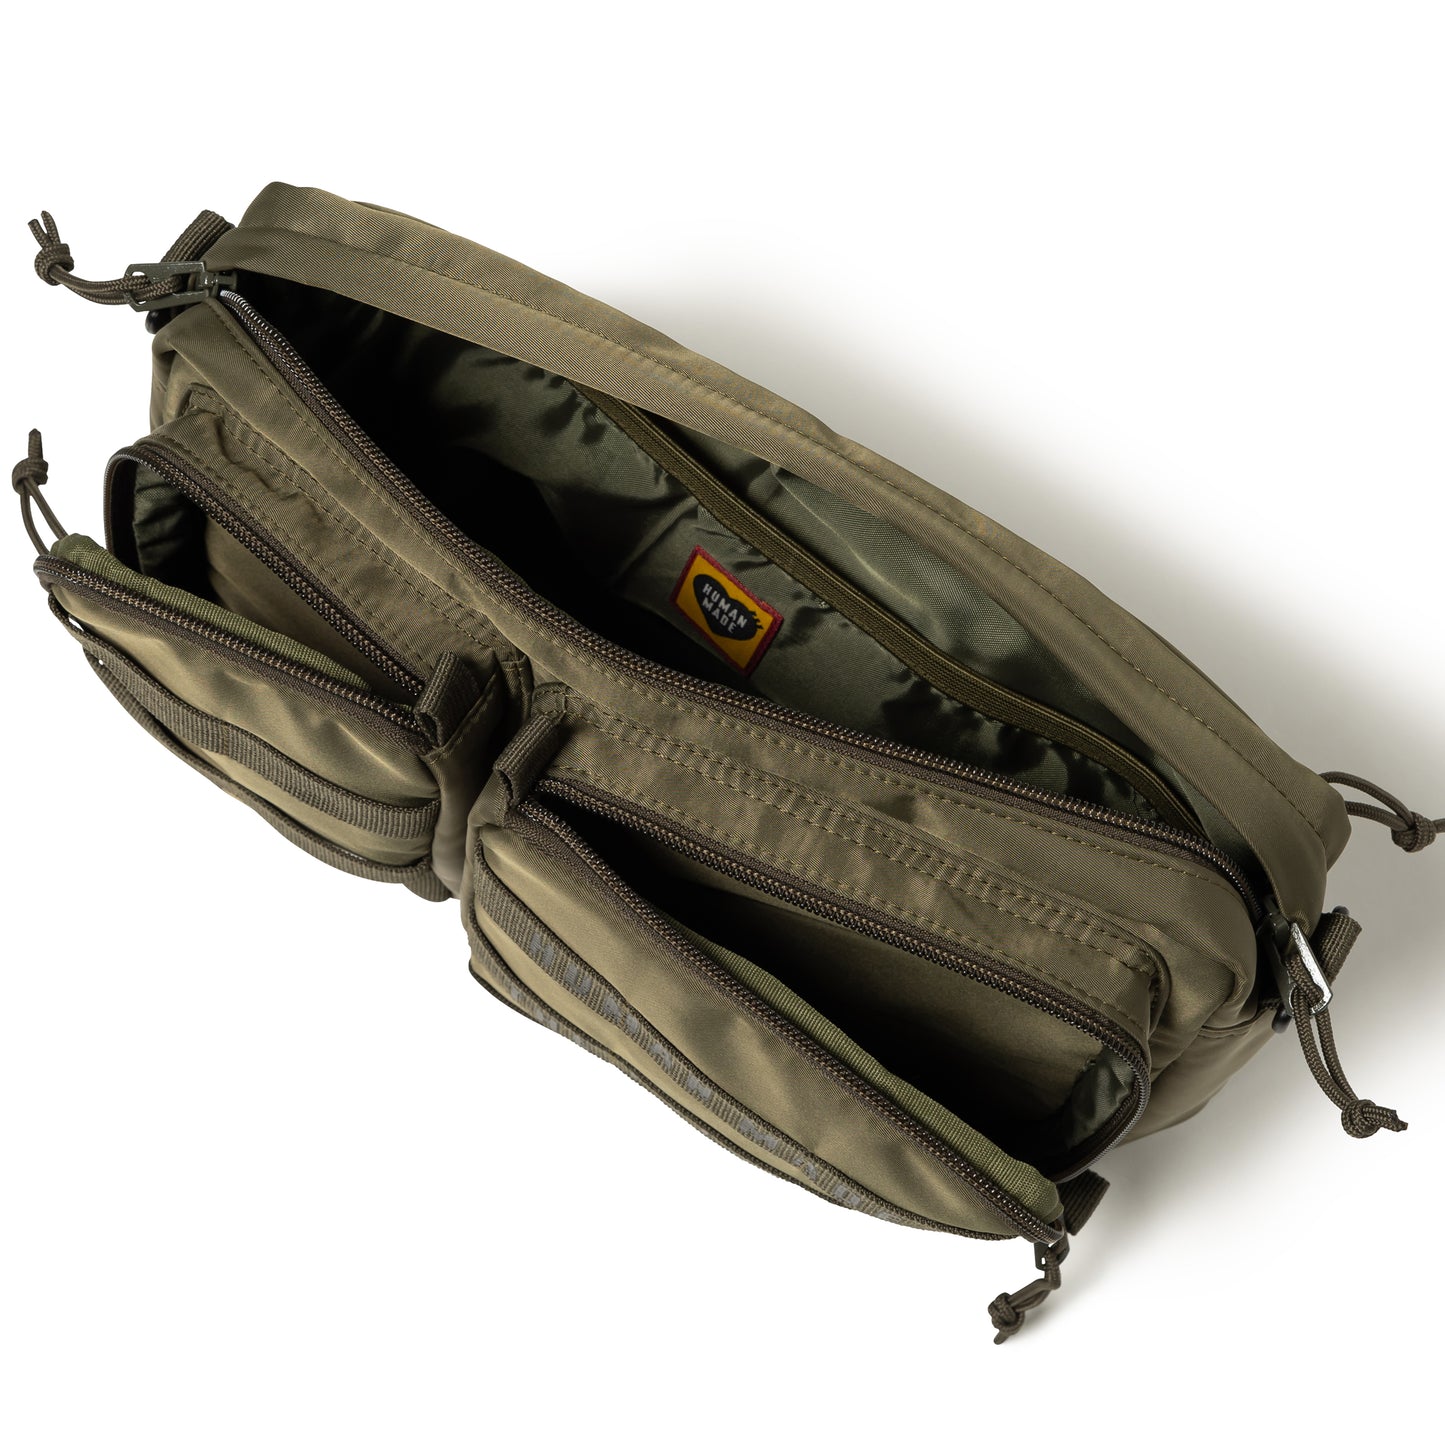 MILITARY POUCH LARGE – HUMAN MADE ONLINE STORE